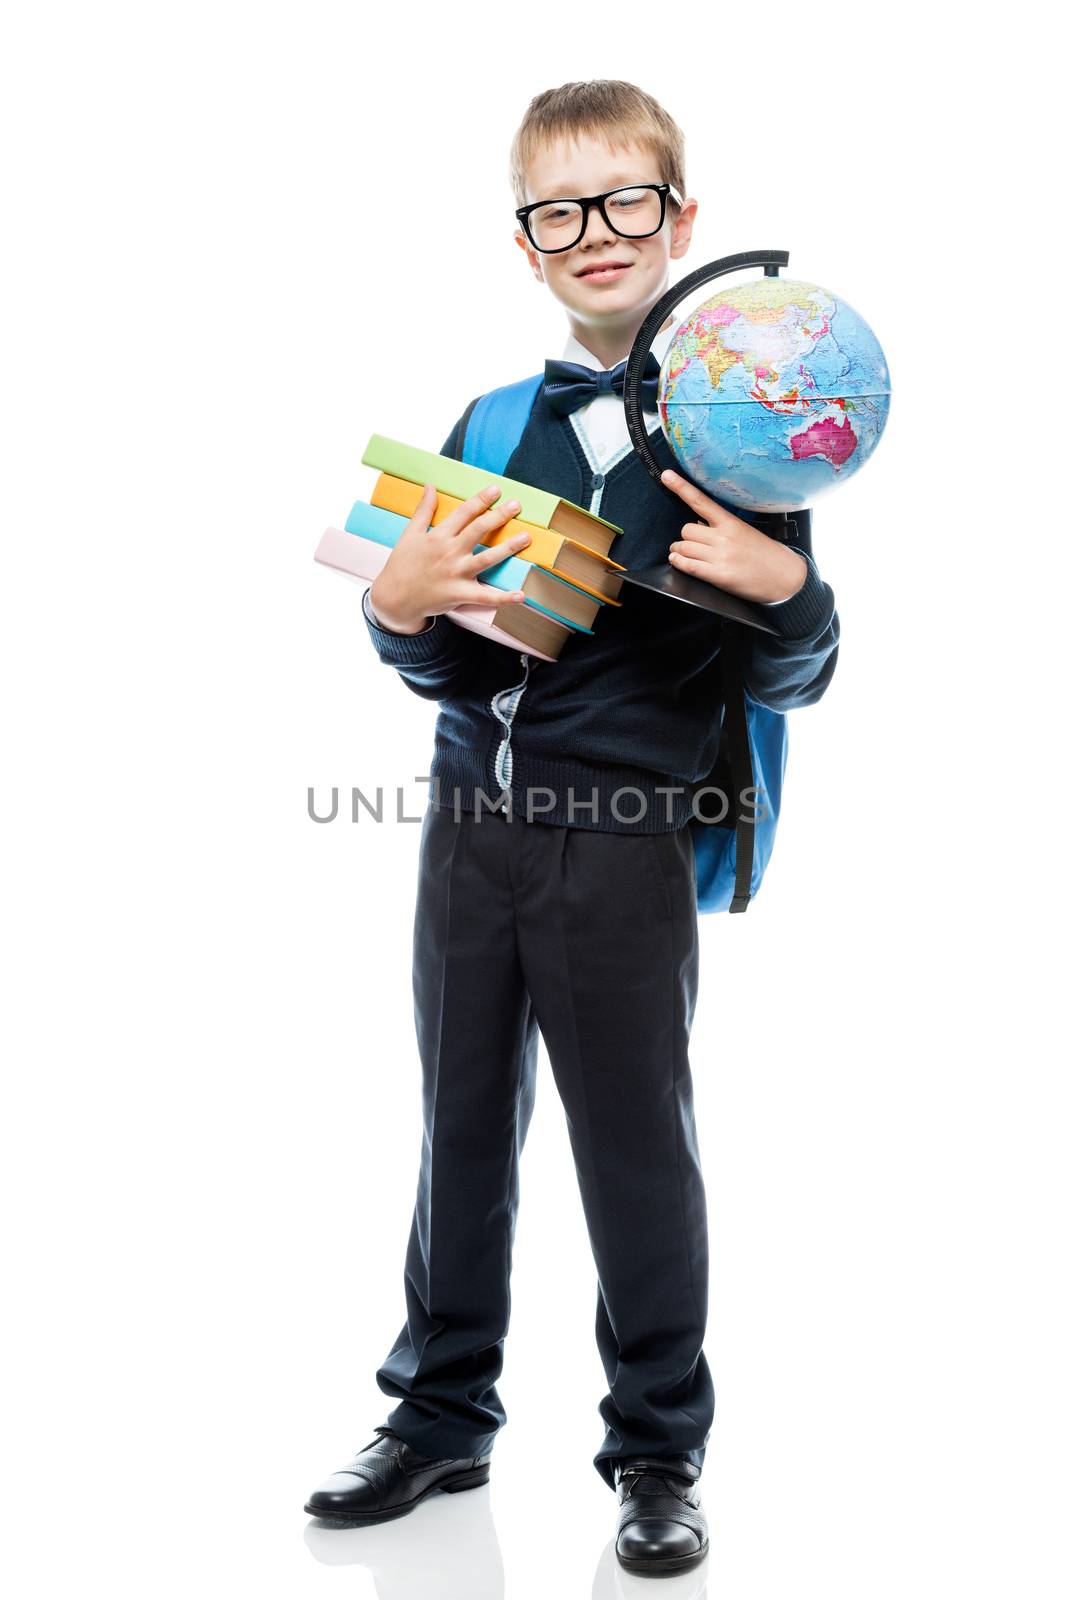 8-year-old schoolboy with a globe and books on a white backgroun by kosmsos111